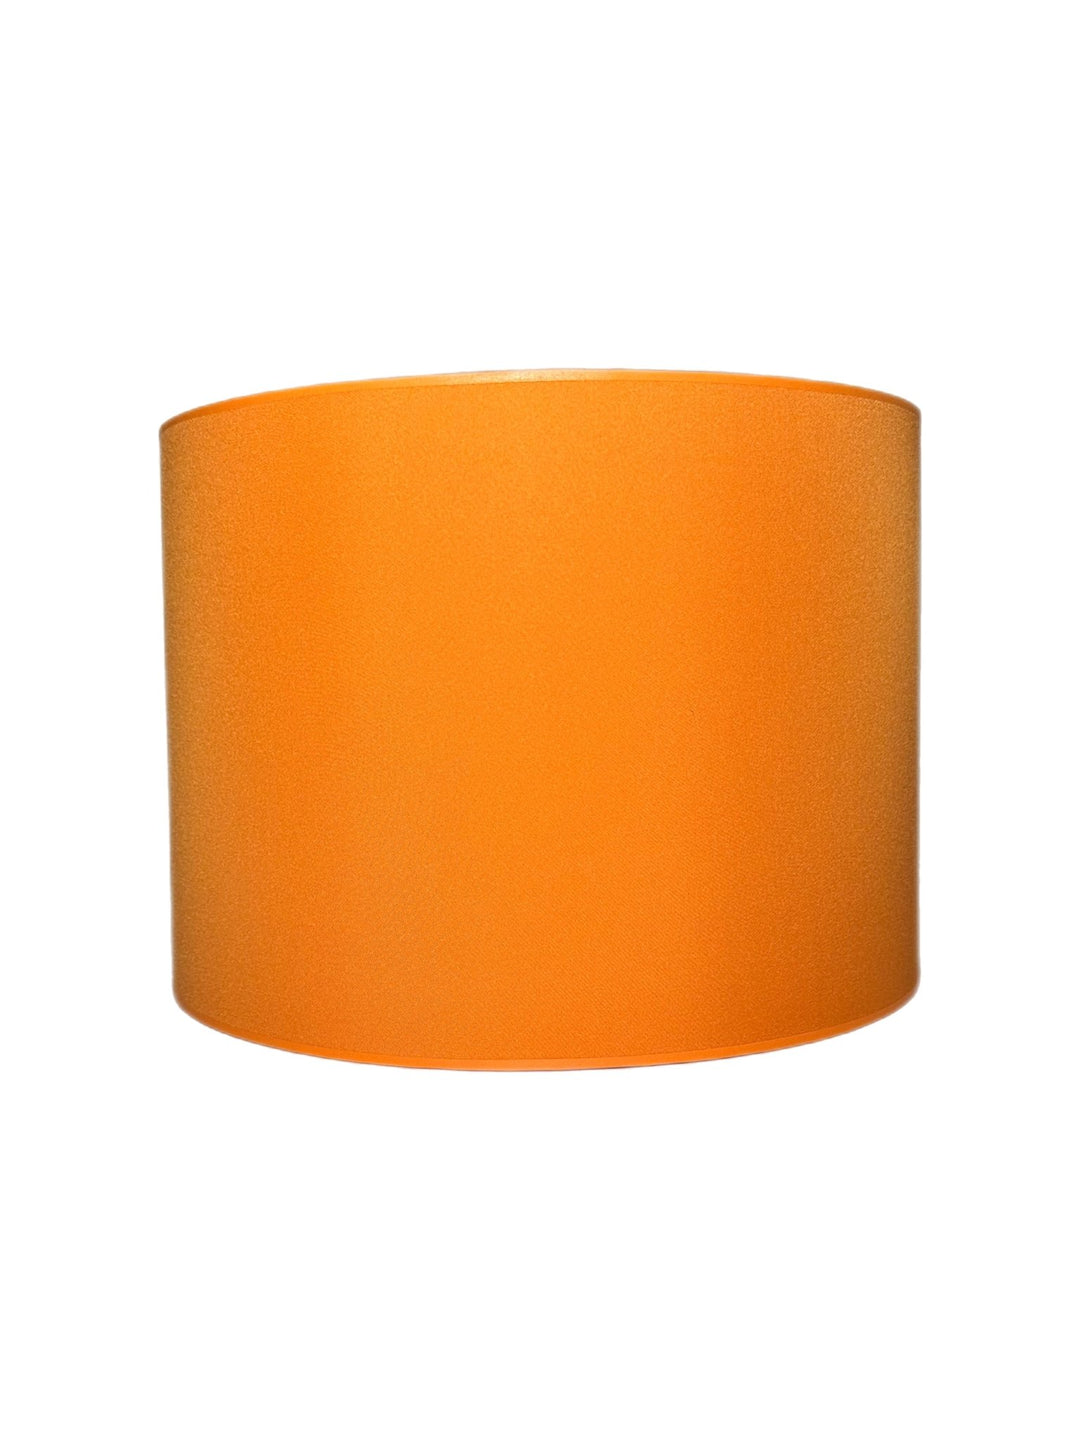 Hardback Drum - multiple sizes and colors - Lux Lamp Shades